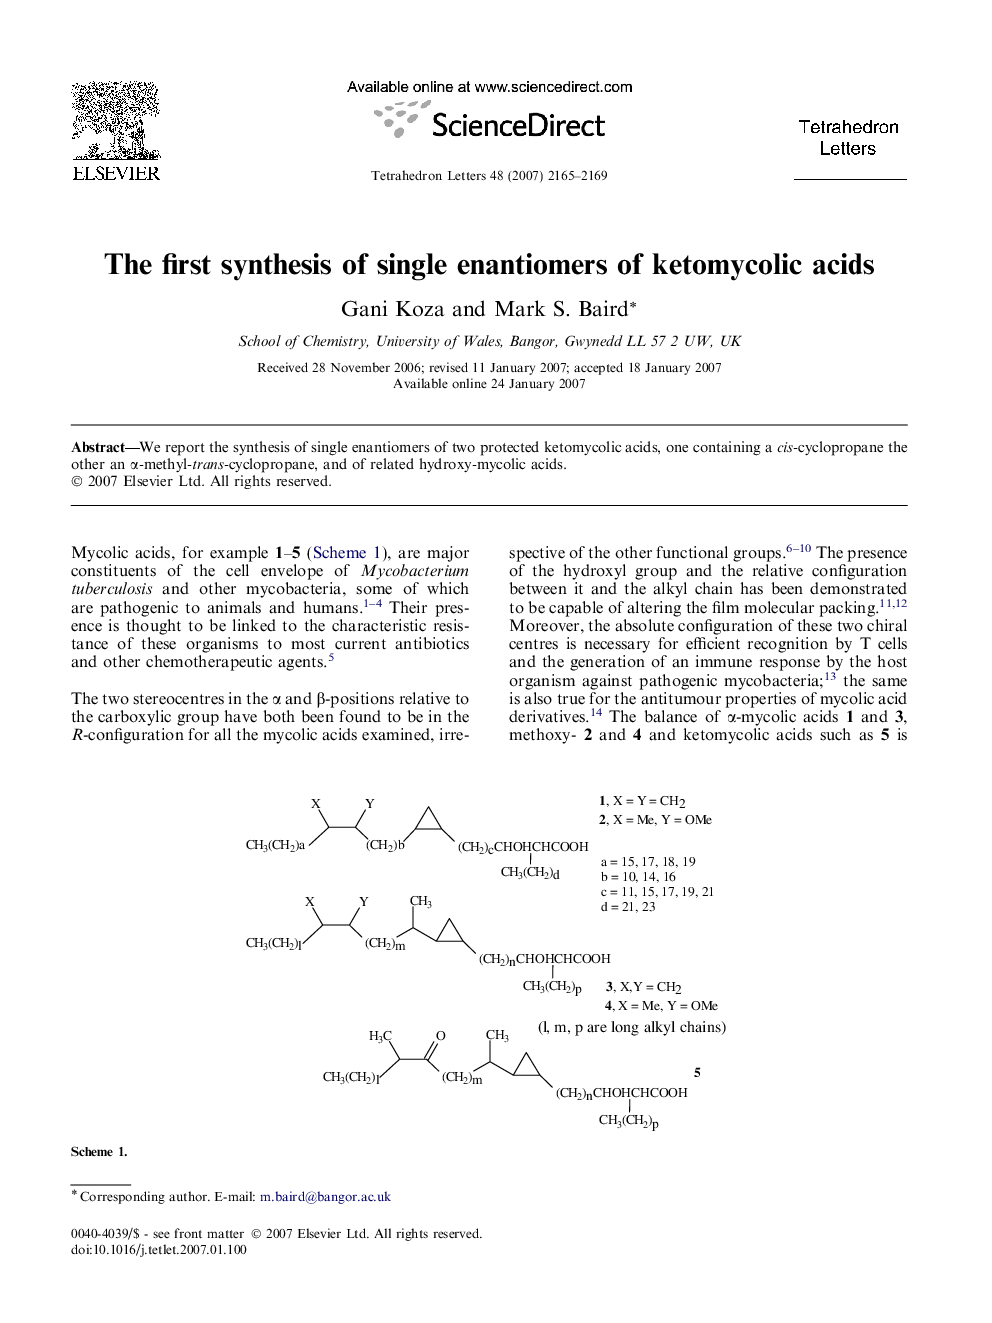 The first synthesis of single enantiomers of ketomycolic acids